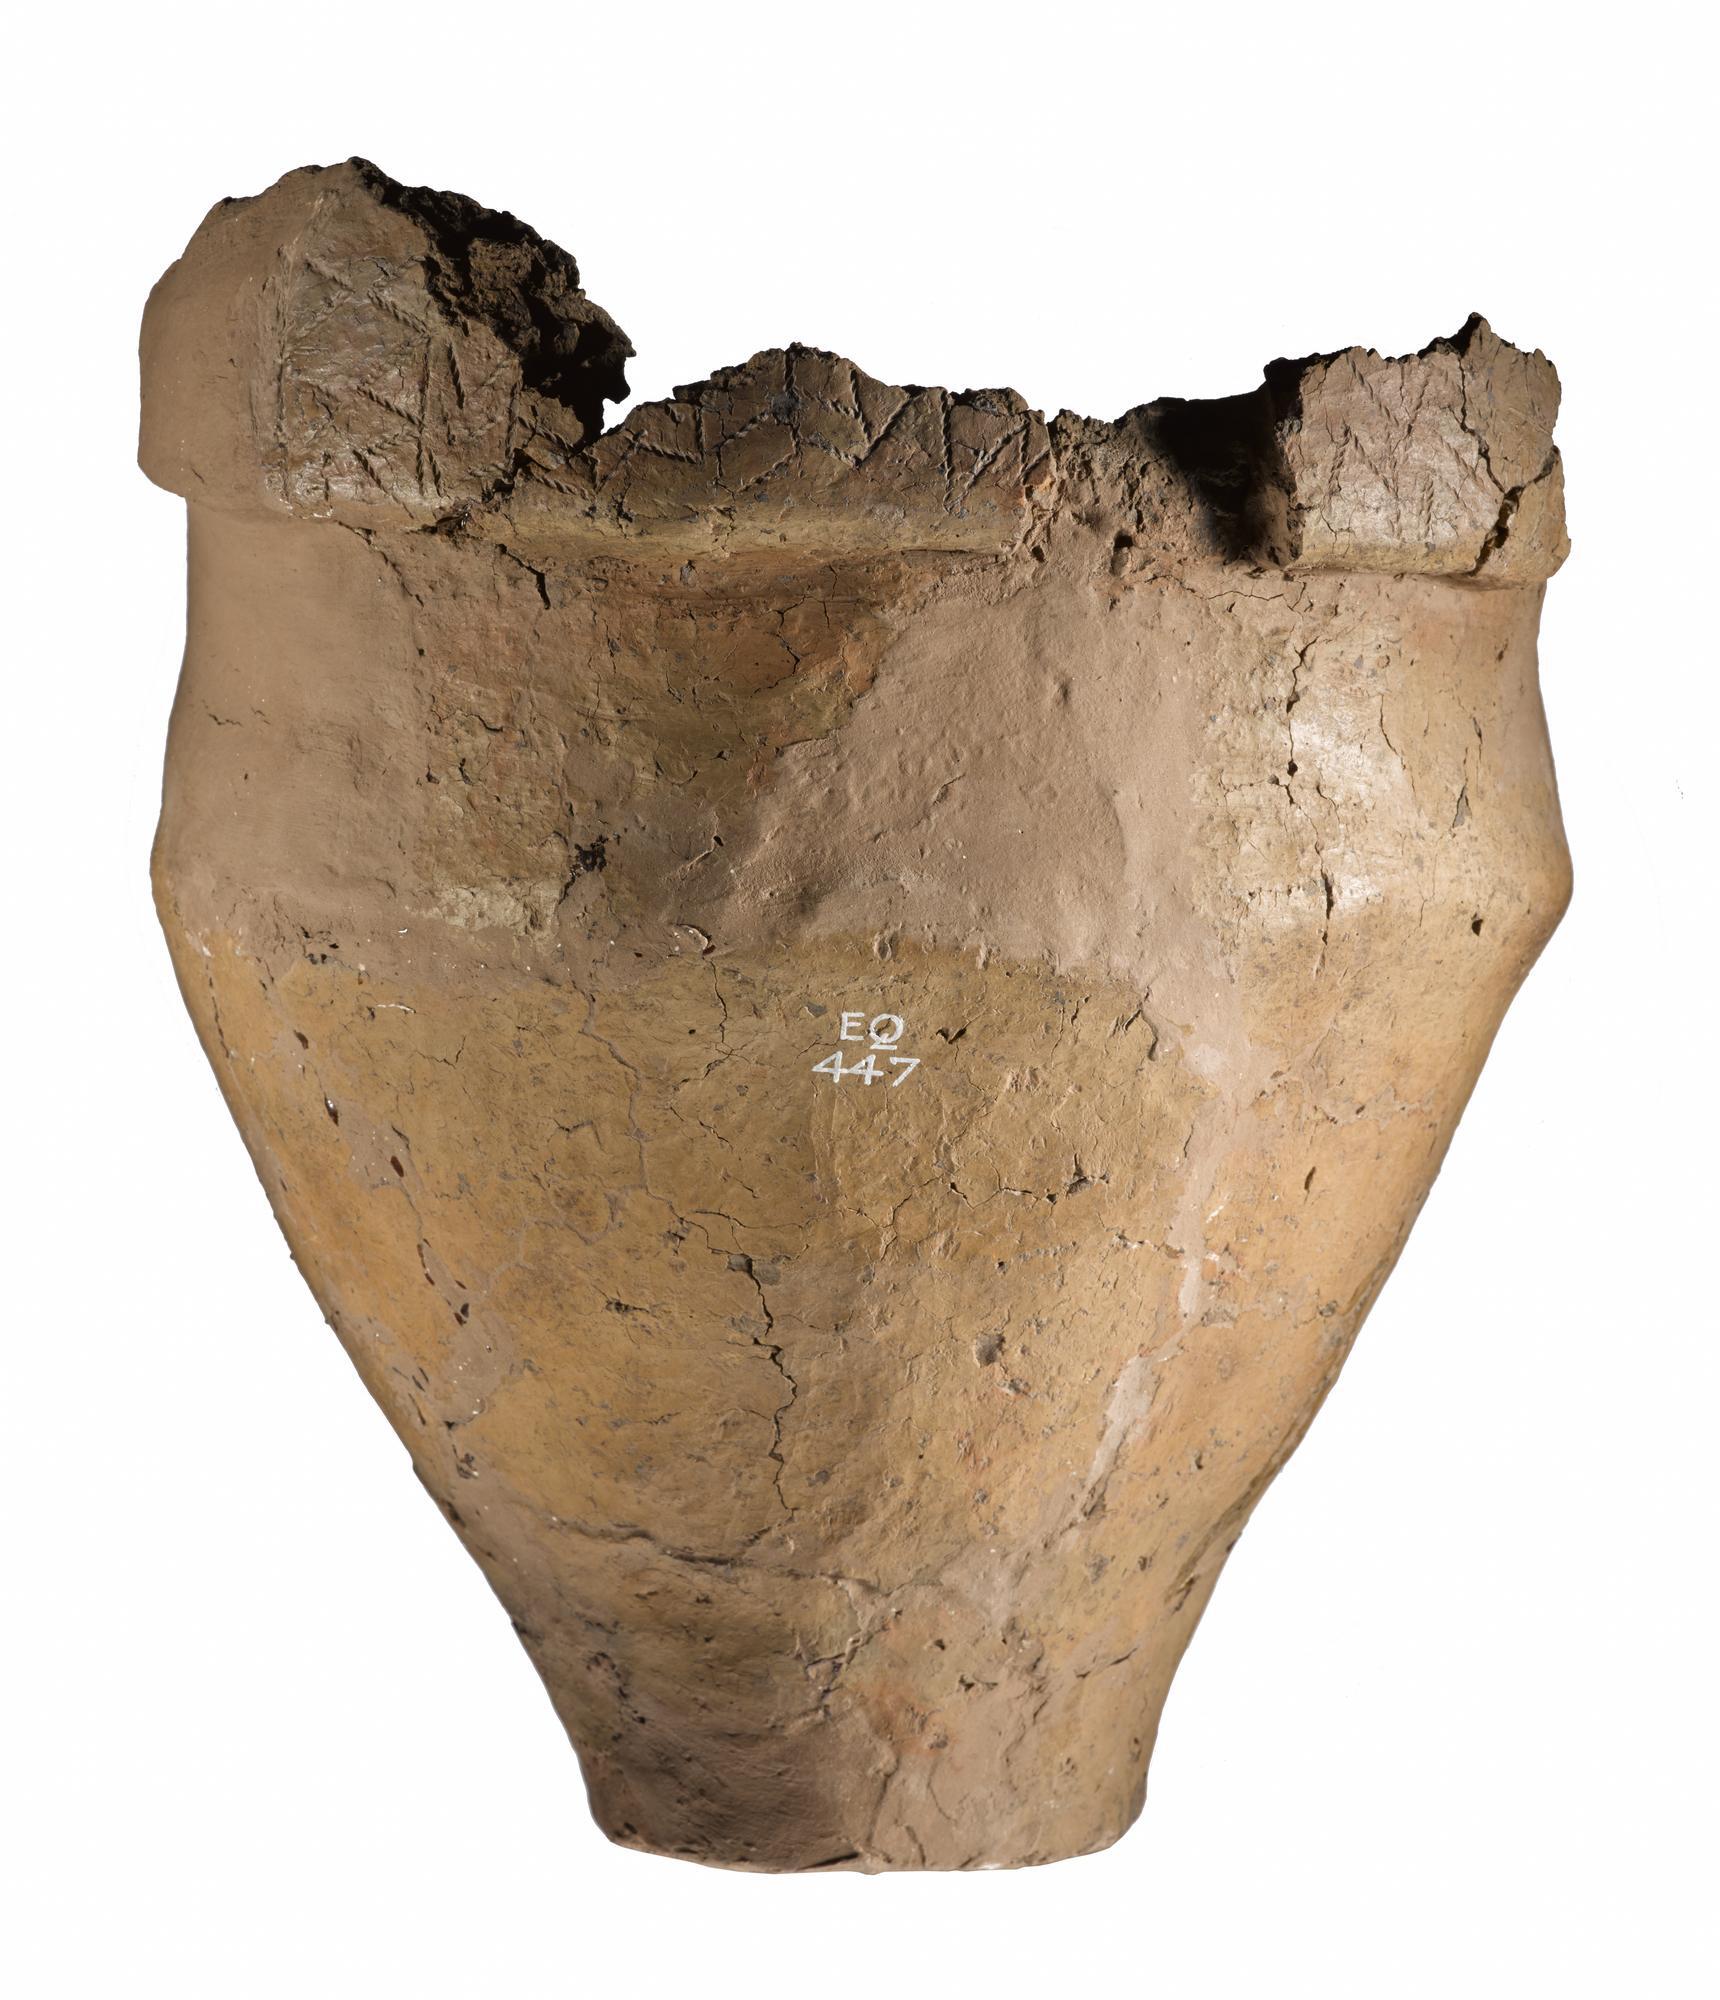 Image of Cinerary urn of brown clay, with overhanging rim, from sepulchral deposit at Outerston Hill, near Temple, Midlothian, Scotland © National Museums Scotland